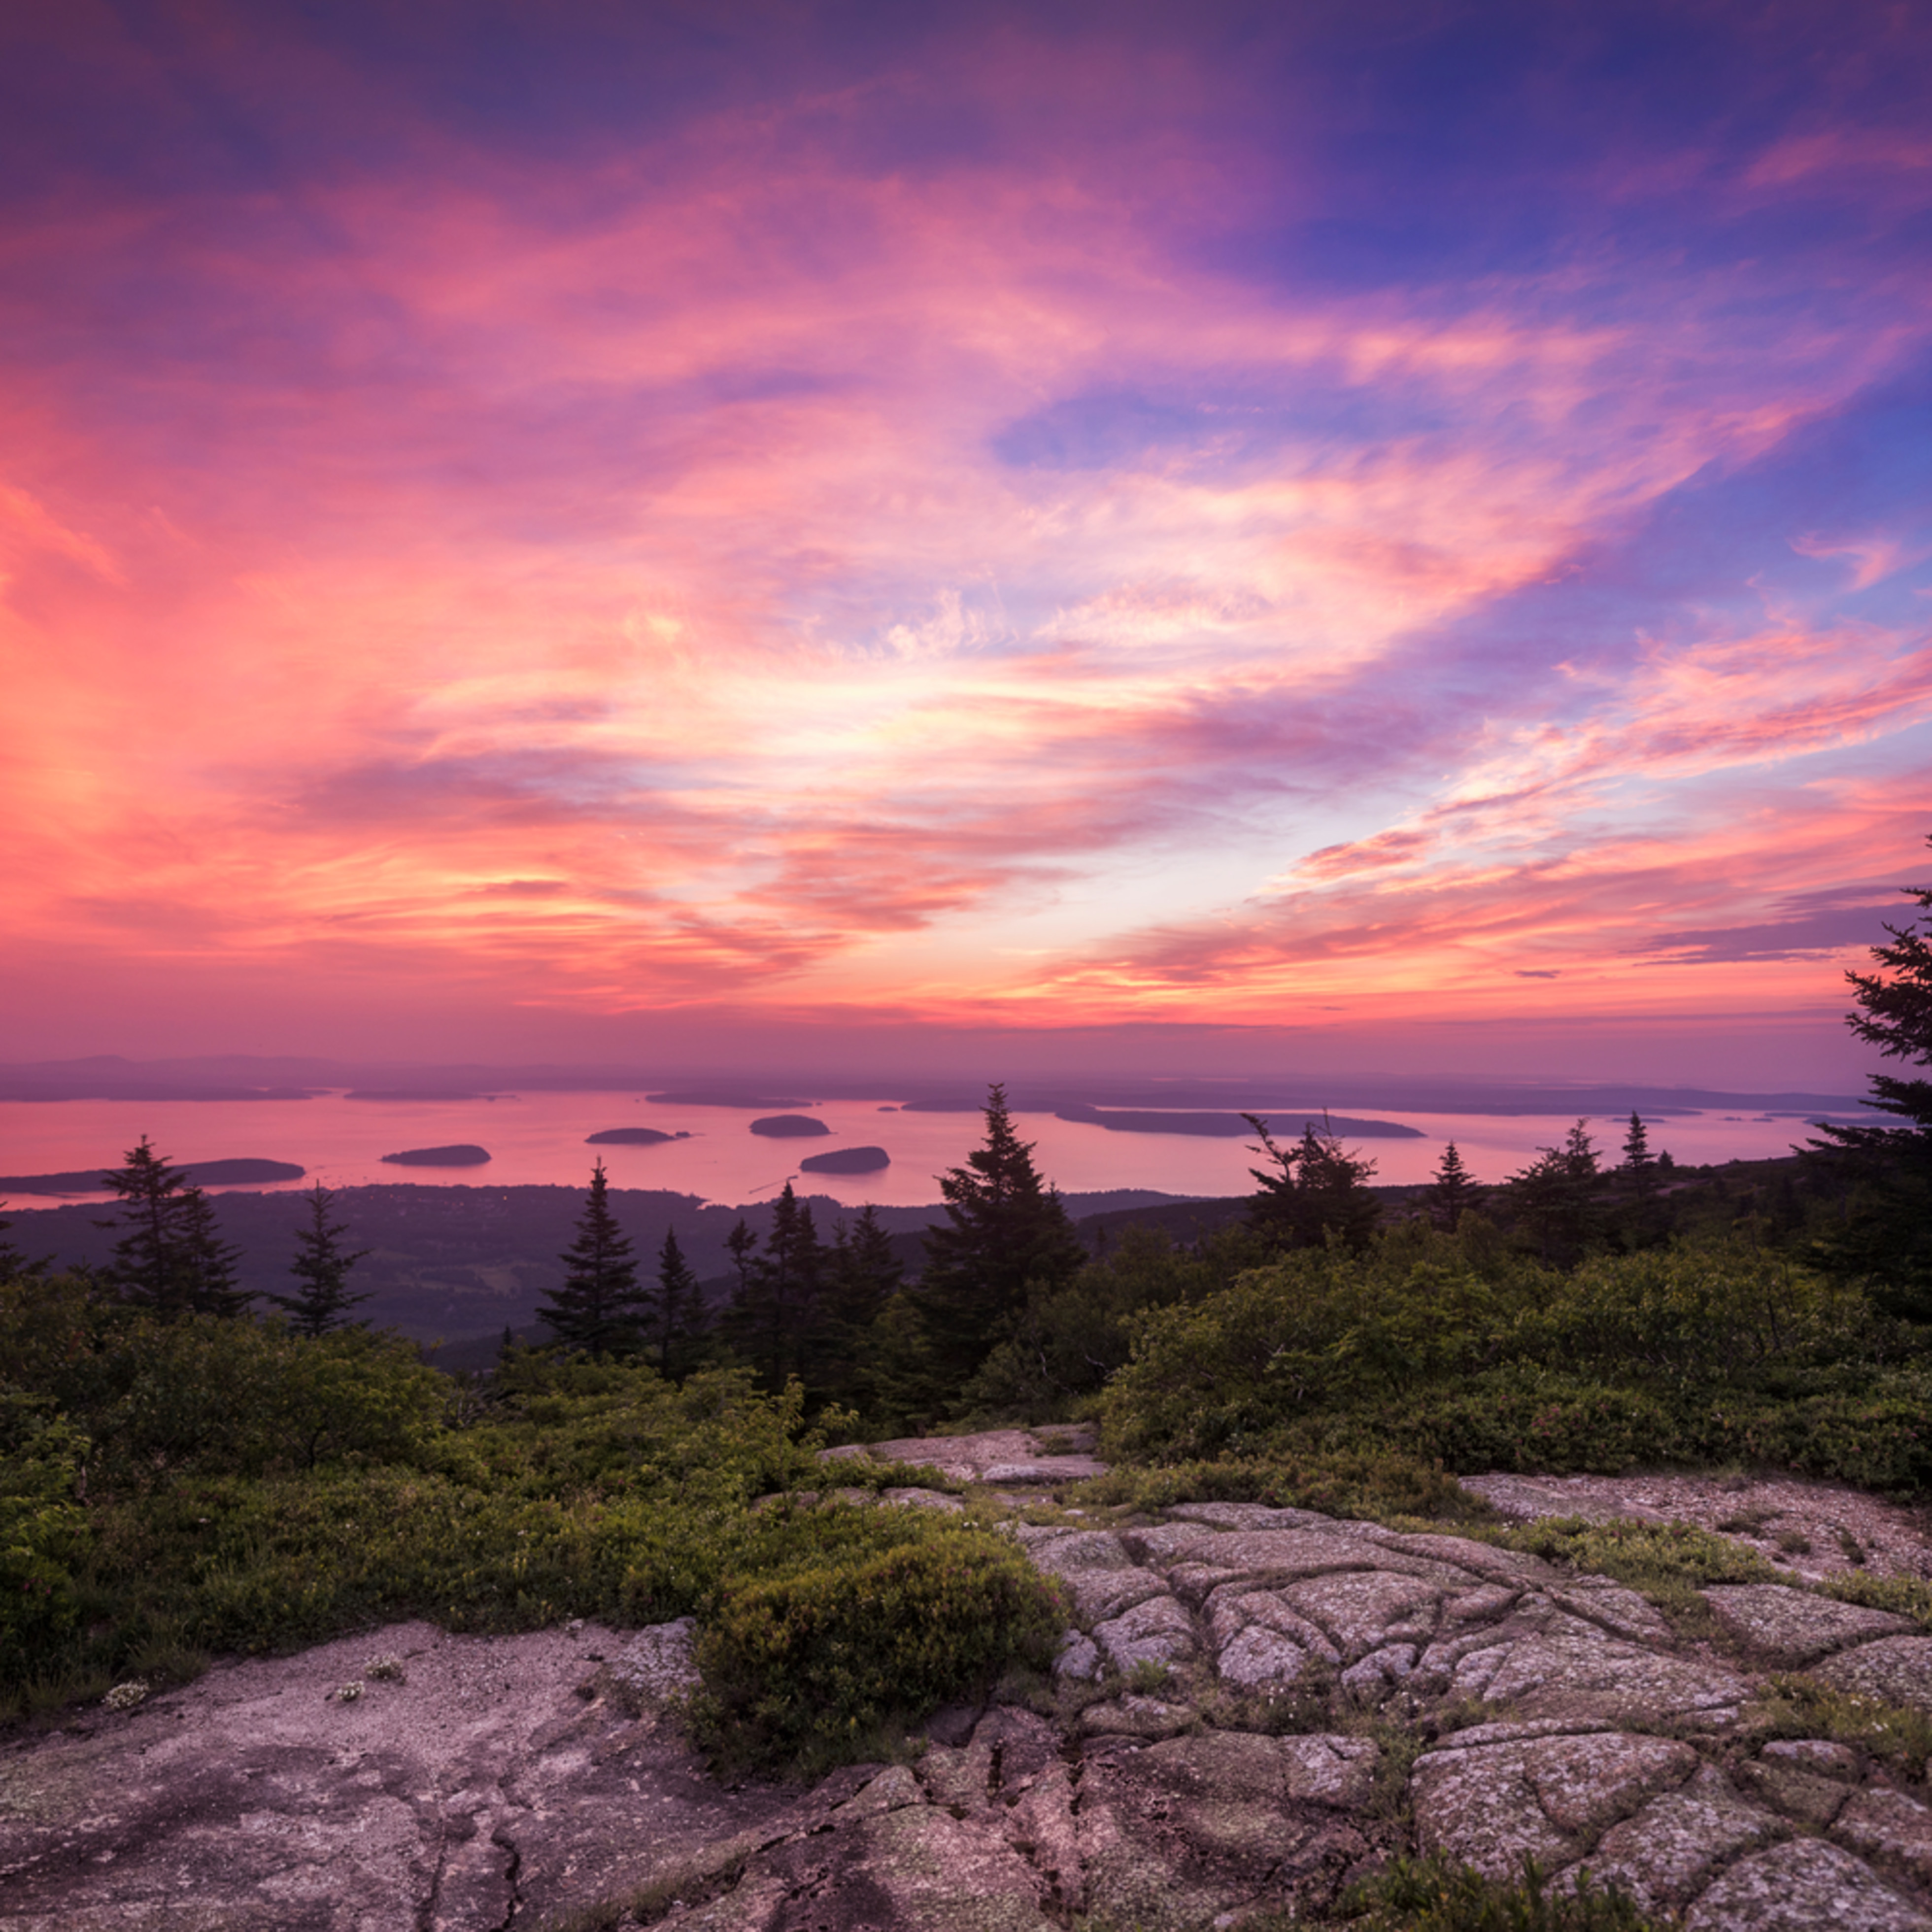 Cadillac Mountain Sunrise, from the highest peak in Maine's Acadia